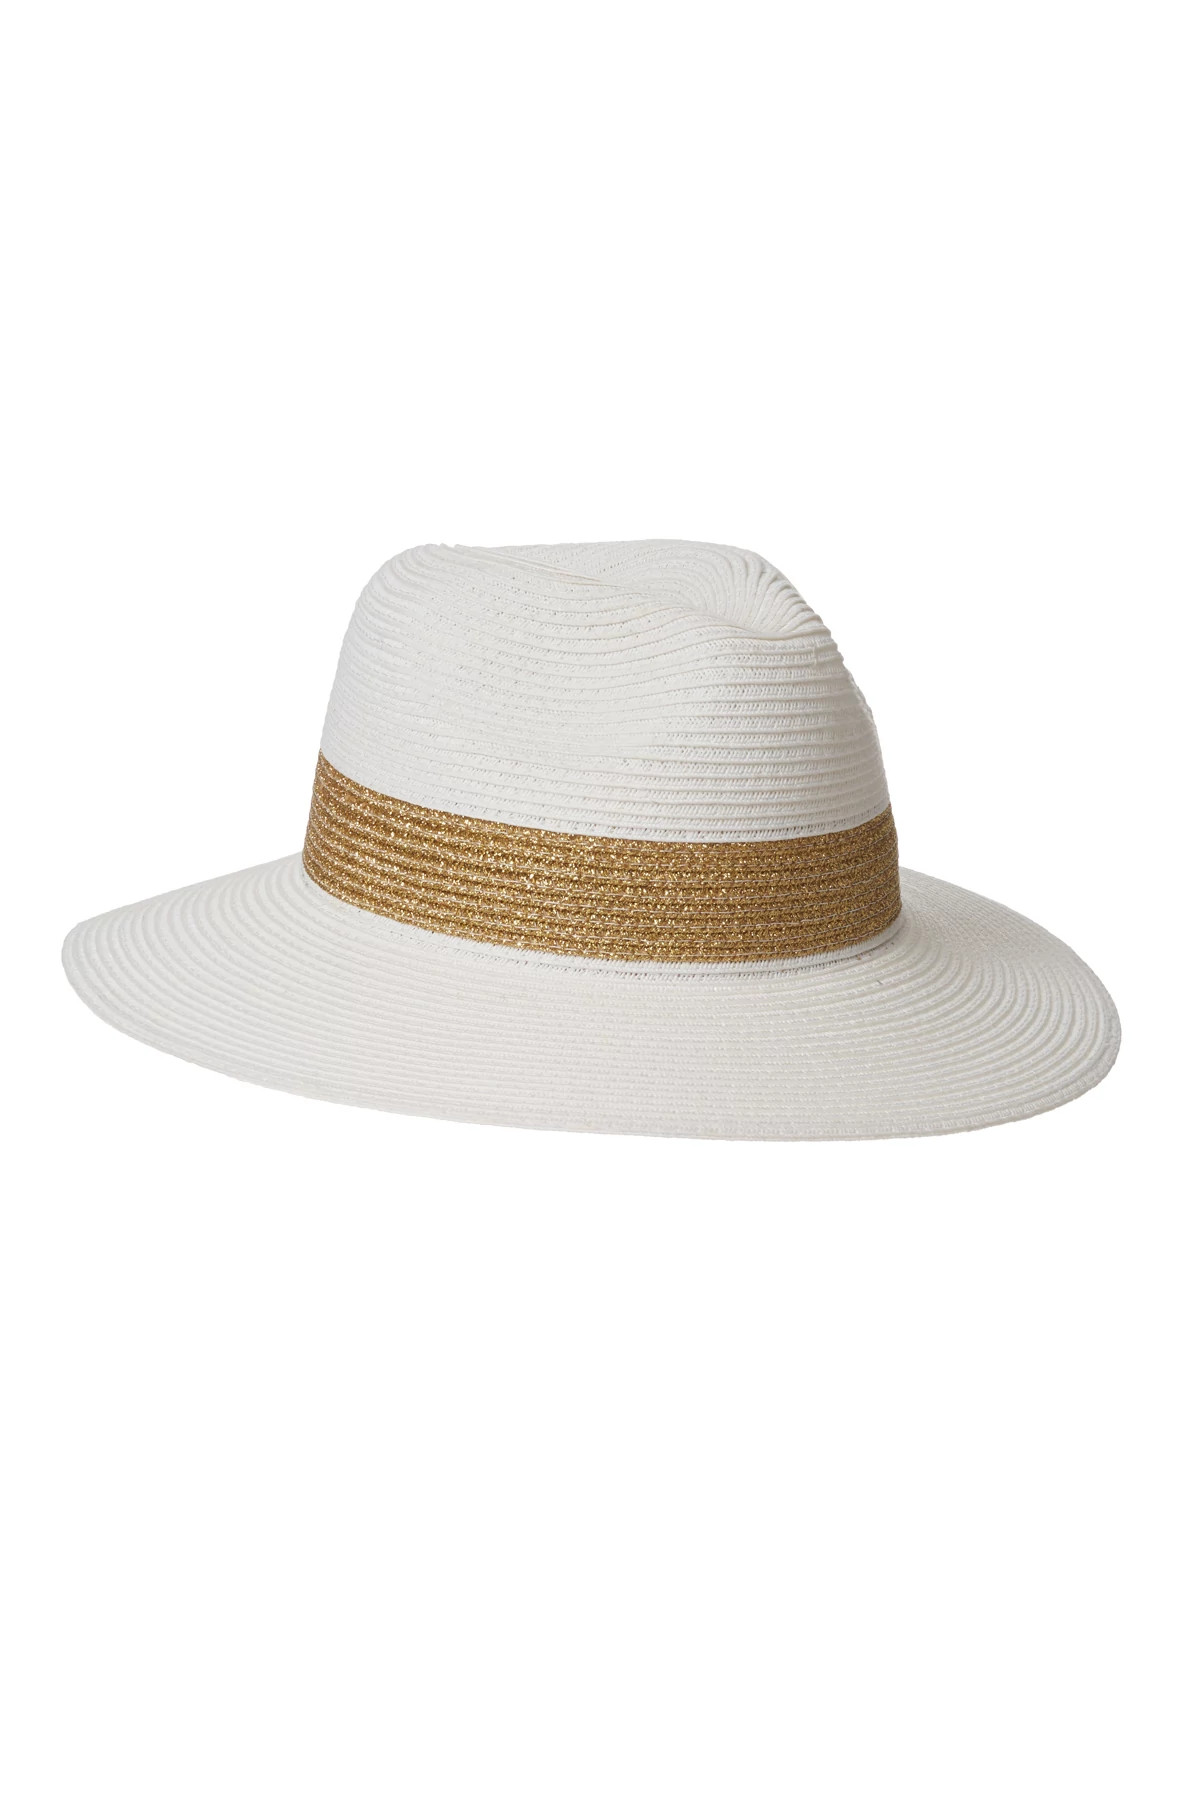 WHITE/GOLD Biscayne Panama Hat image number 1